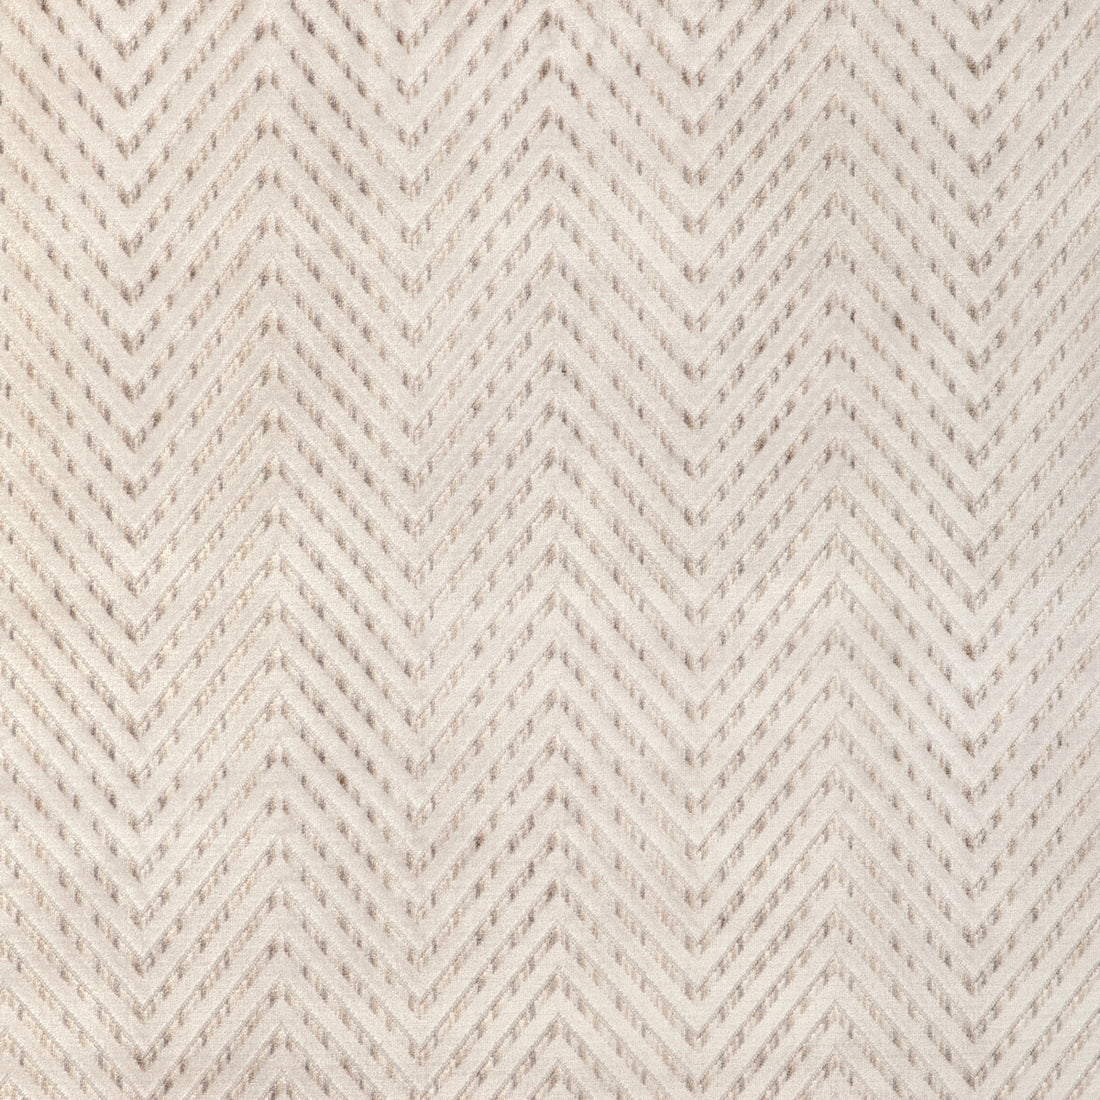 Dunand fabric in gold color - pattern 36969.416.0 - by Kravet Basics in the Mid-Century Modern collection